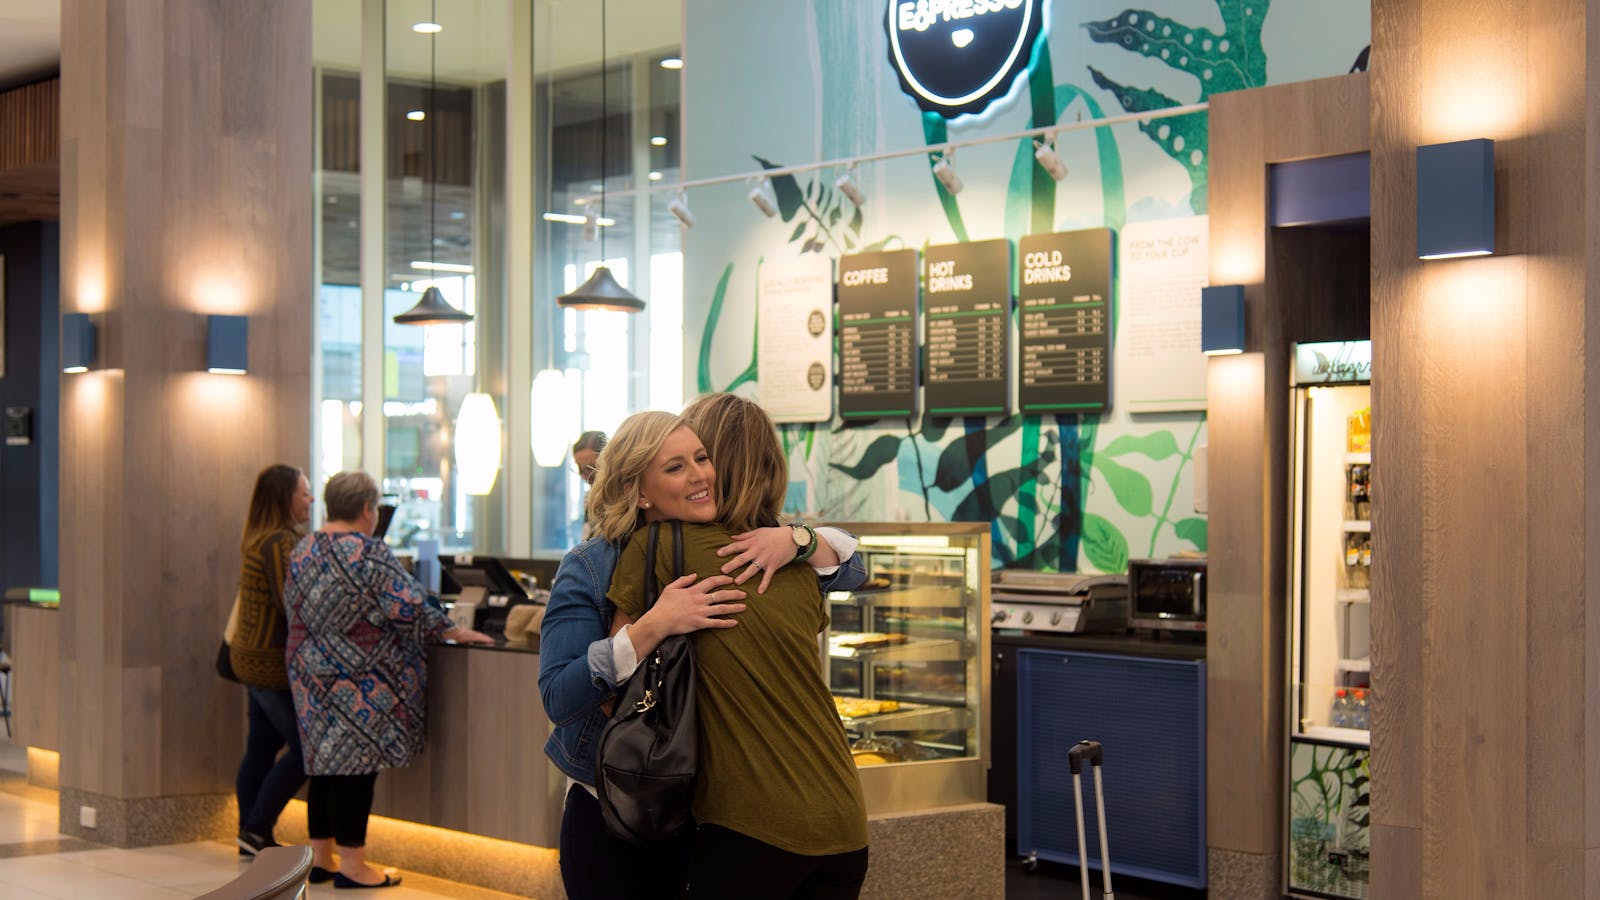 Passengers greet each other in front of Wilderness Espresso Cafe at Launceston Airport